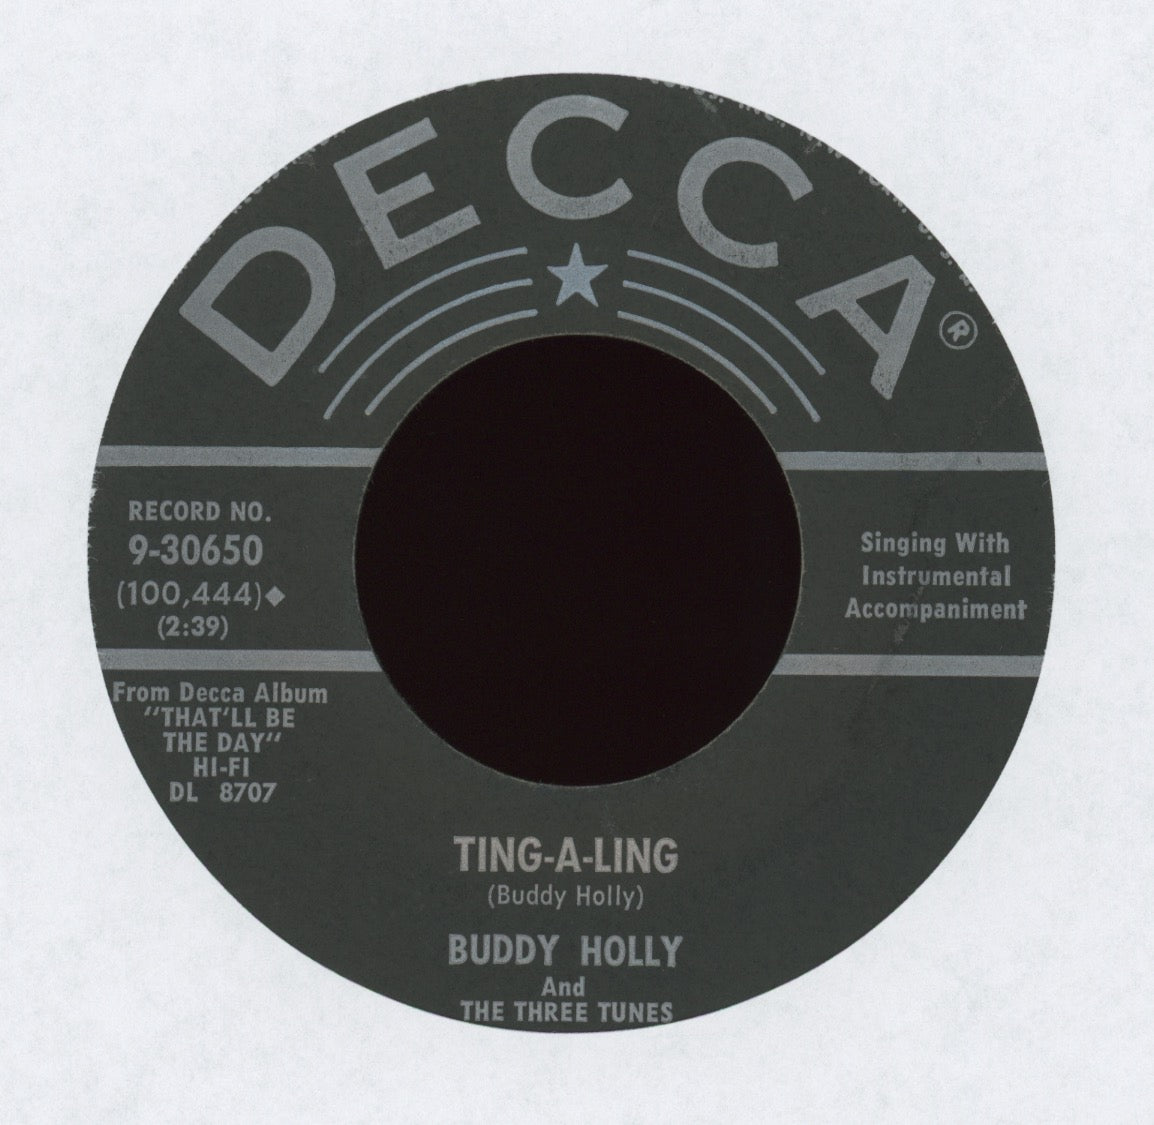 Buddy Holly - Ting-A-Ling on Decca